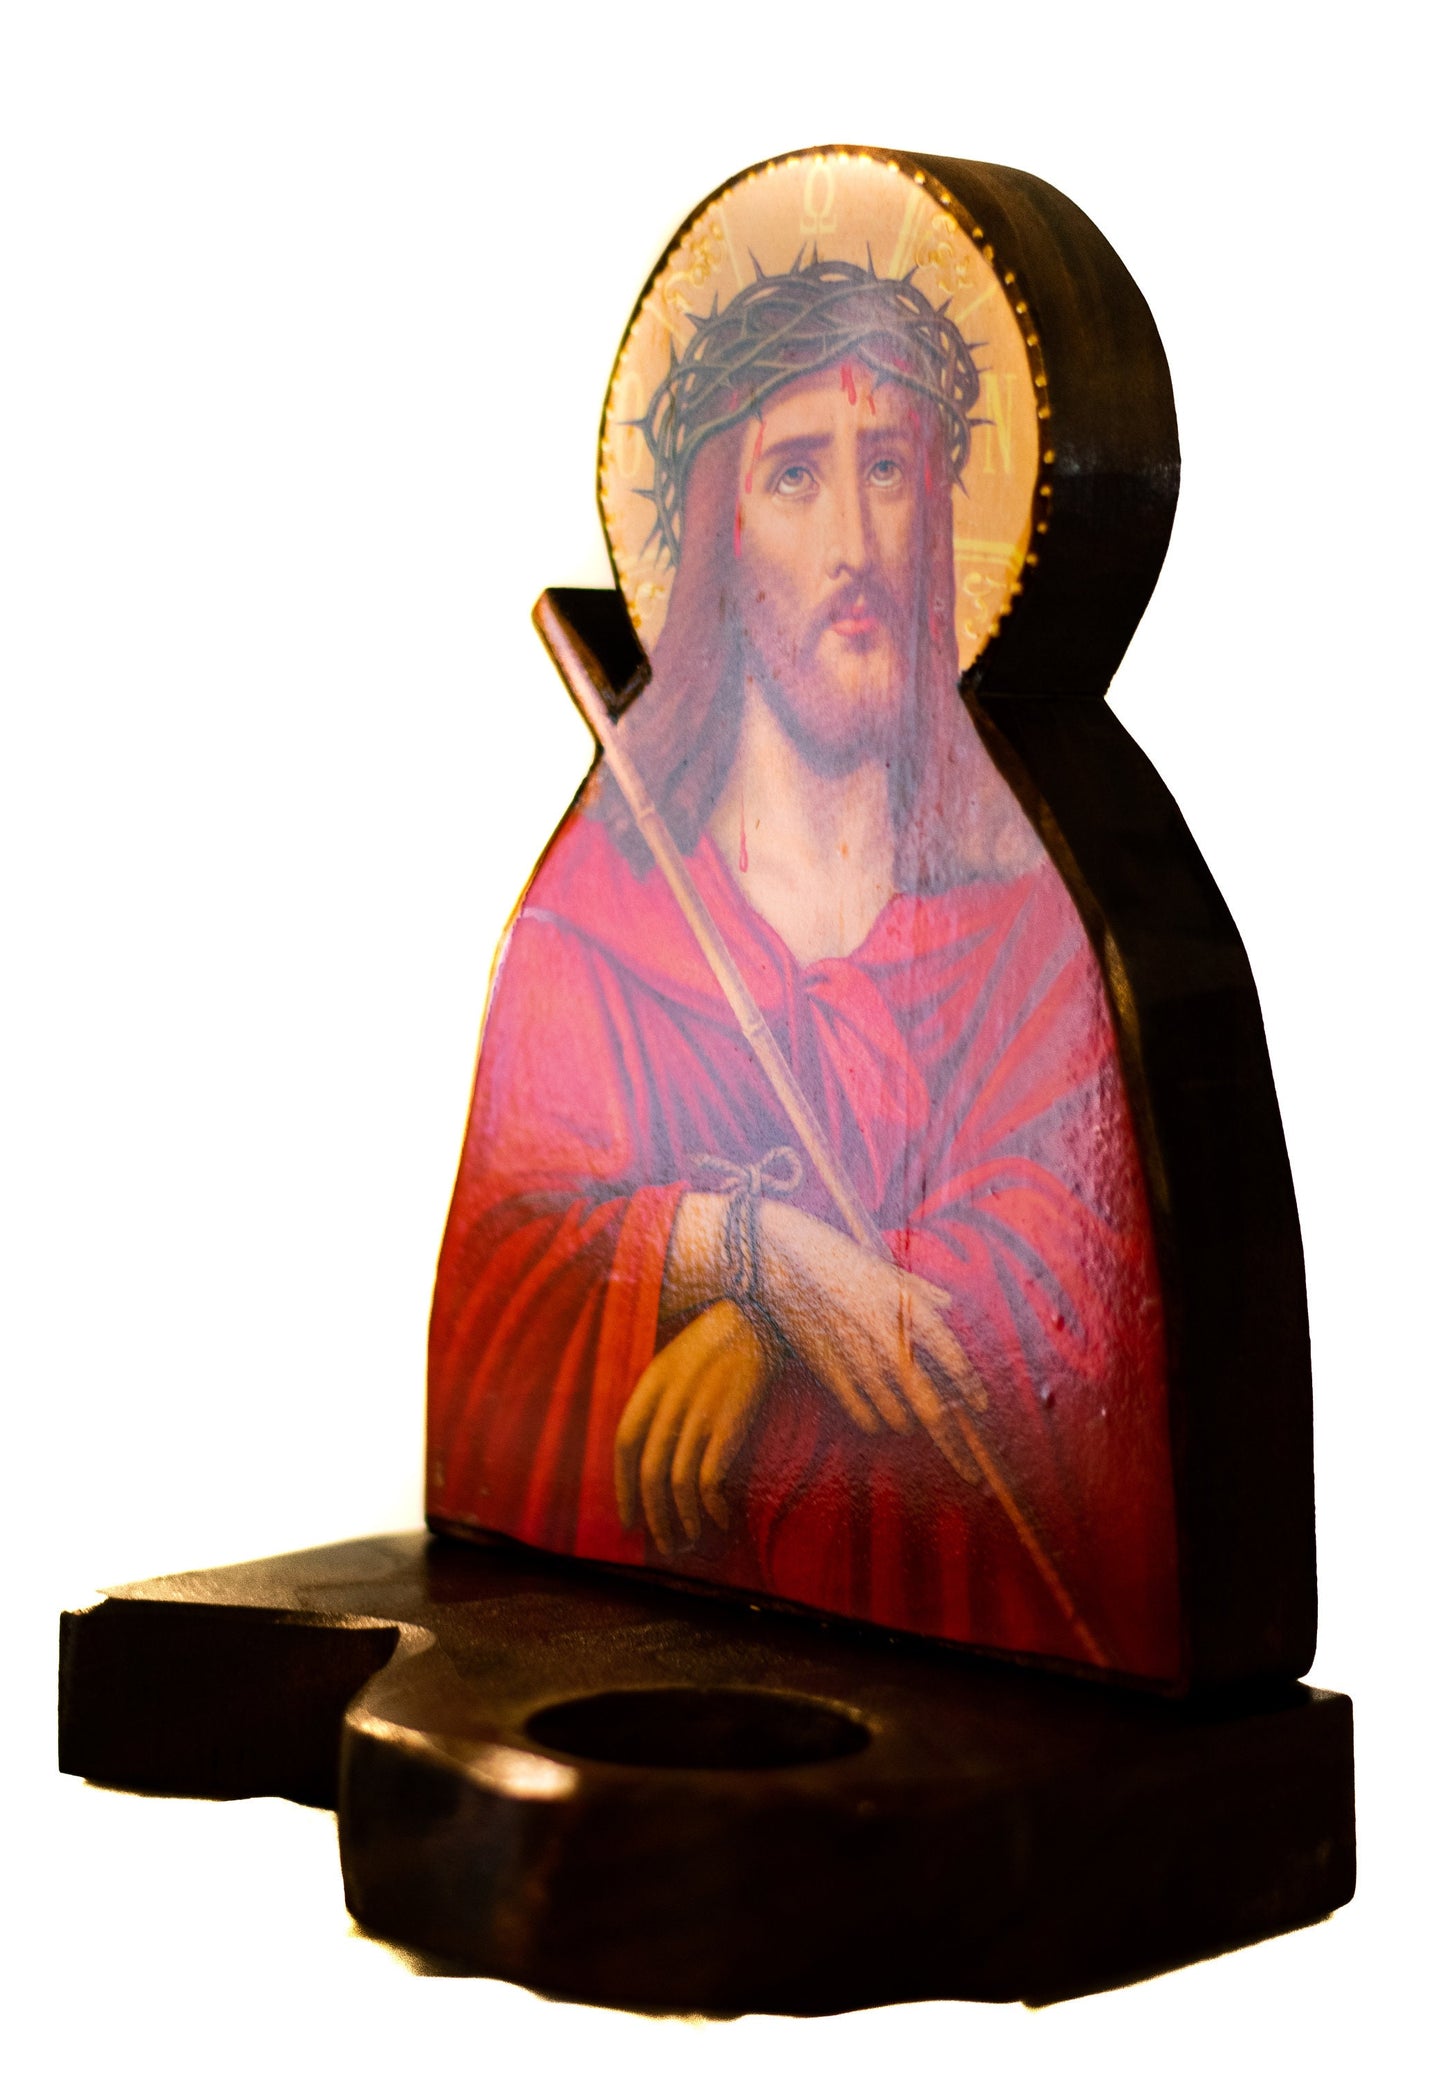 Christian Iconostasis with Jesus Christ Nymphios 30x22cm, Handmade Orthodox shrine of Our Lord, Byzantine altar wall hanging wood plaque TheHolyArt